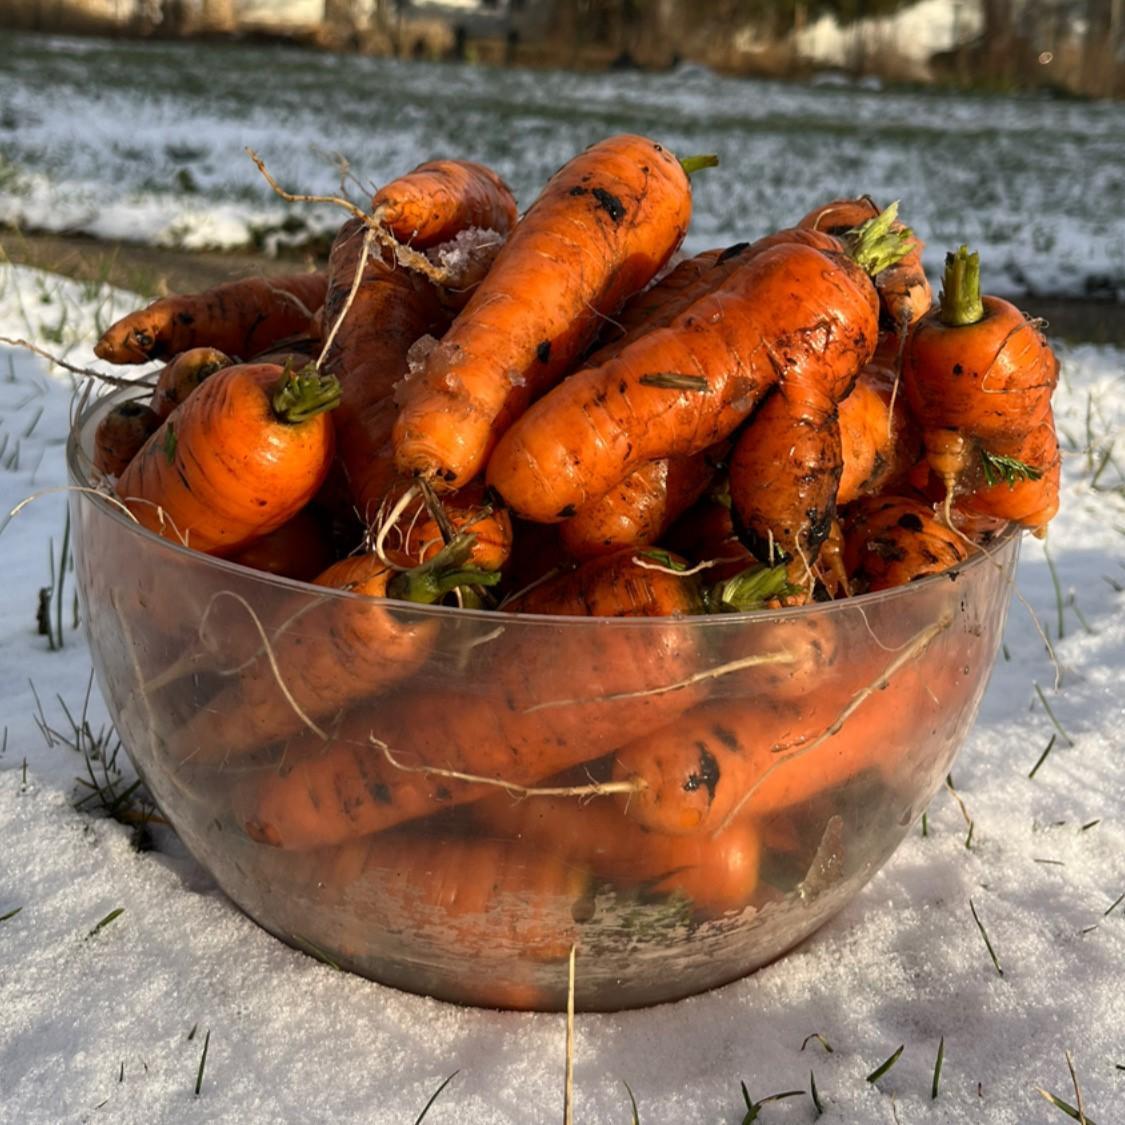 A bowl of freshly harvested orange carrots sitting on snow-covered ground.